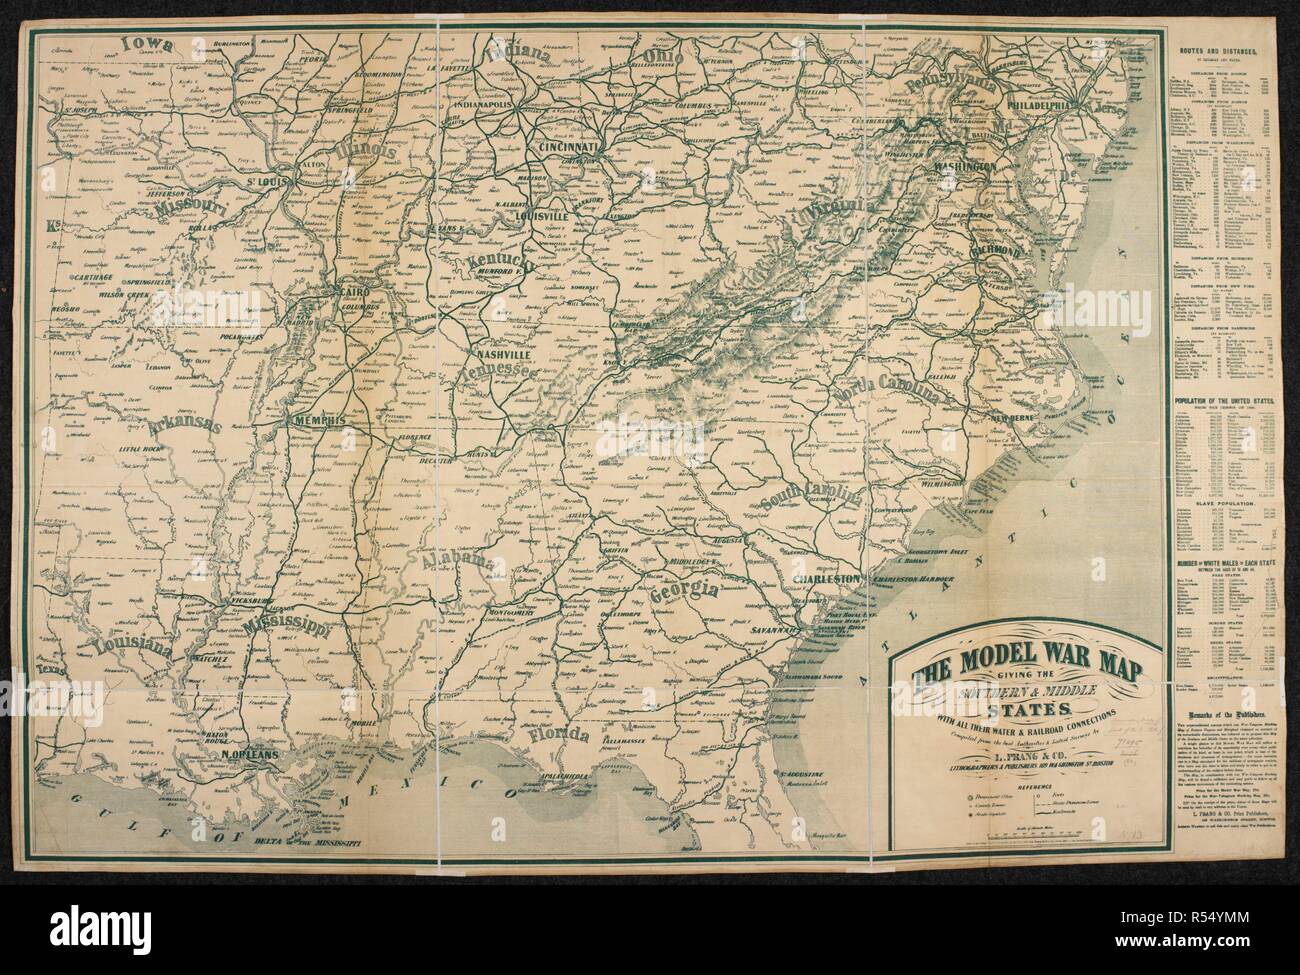 A map of the Southern and Middle States of North America. The Model War Map, giving the Southern and Middle States, with all their Water and Railroad Connections, by L. Prang & Co. Boston, 1862. Source: Maps 71495.(63.). Language: English. Stock Photo